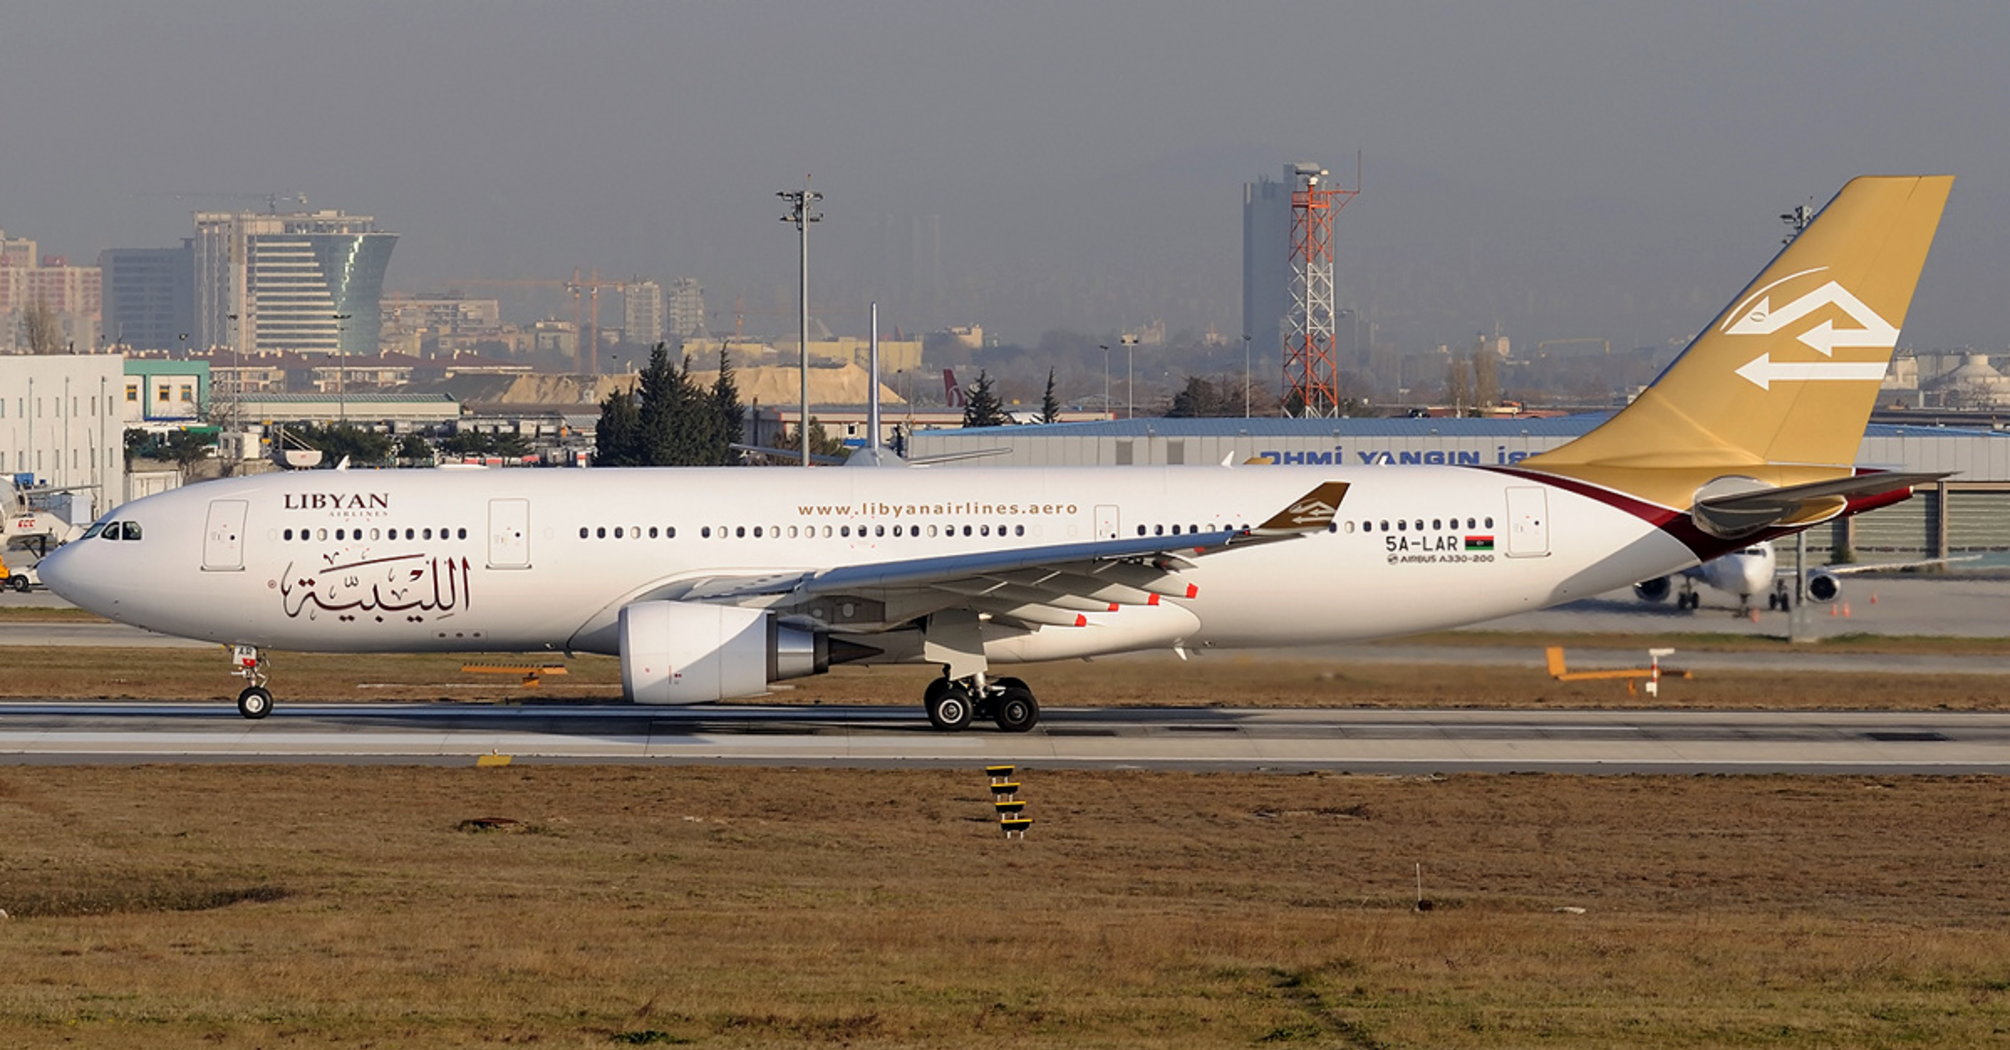 Libyan Airlines Compensation for Delayed or Cancelled Flights